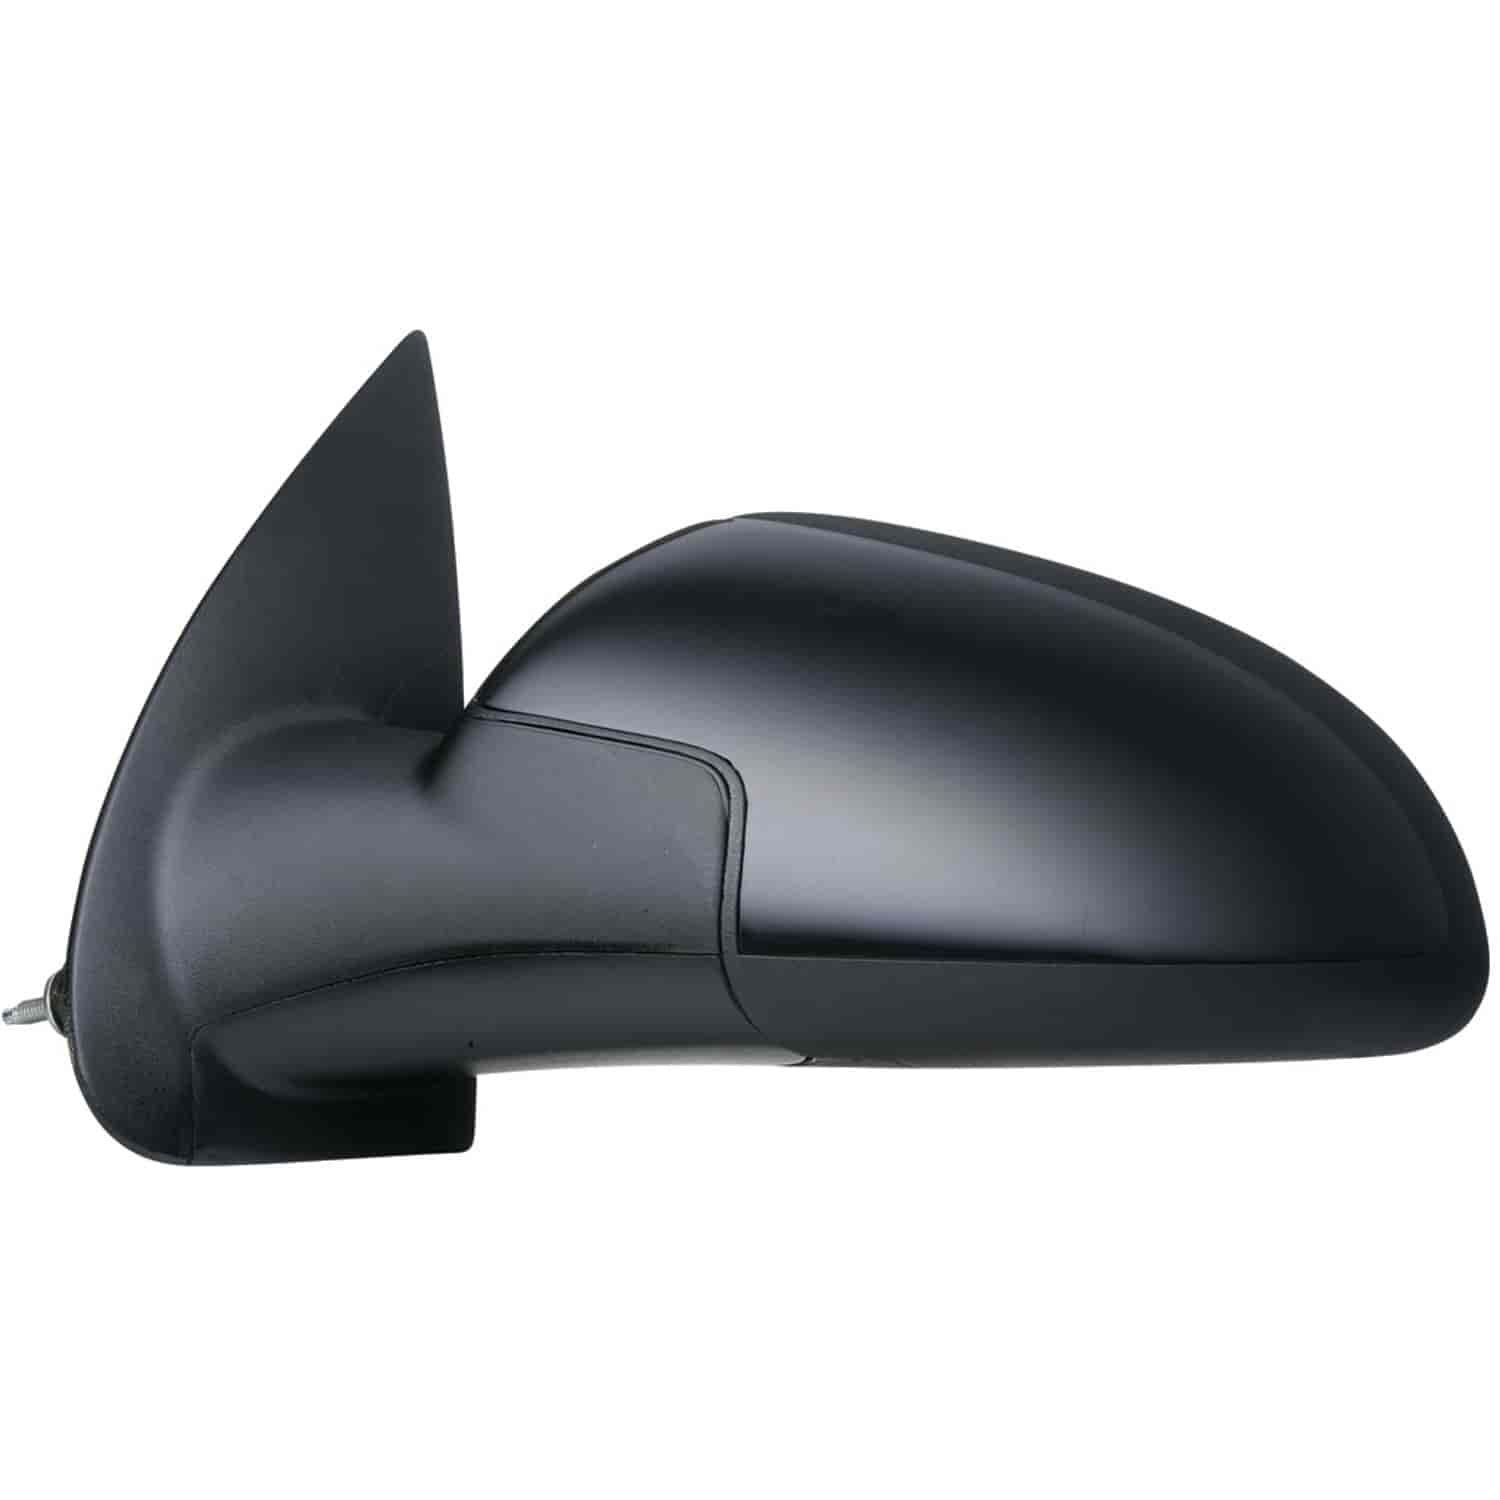 OEM Style Replacement mirror for 05-10 Chevrolet Cobalt Coupe 07-10 Pontiac G5 driver side mirror te